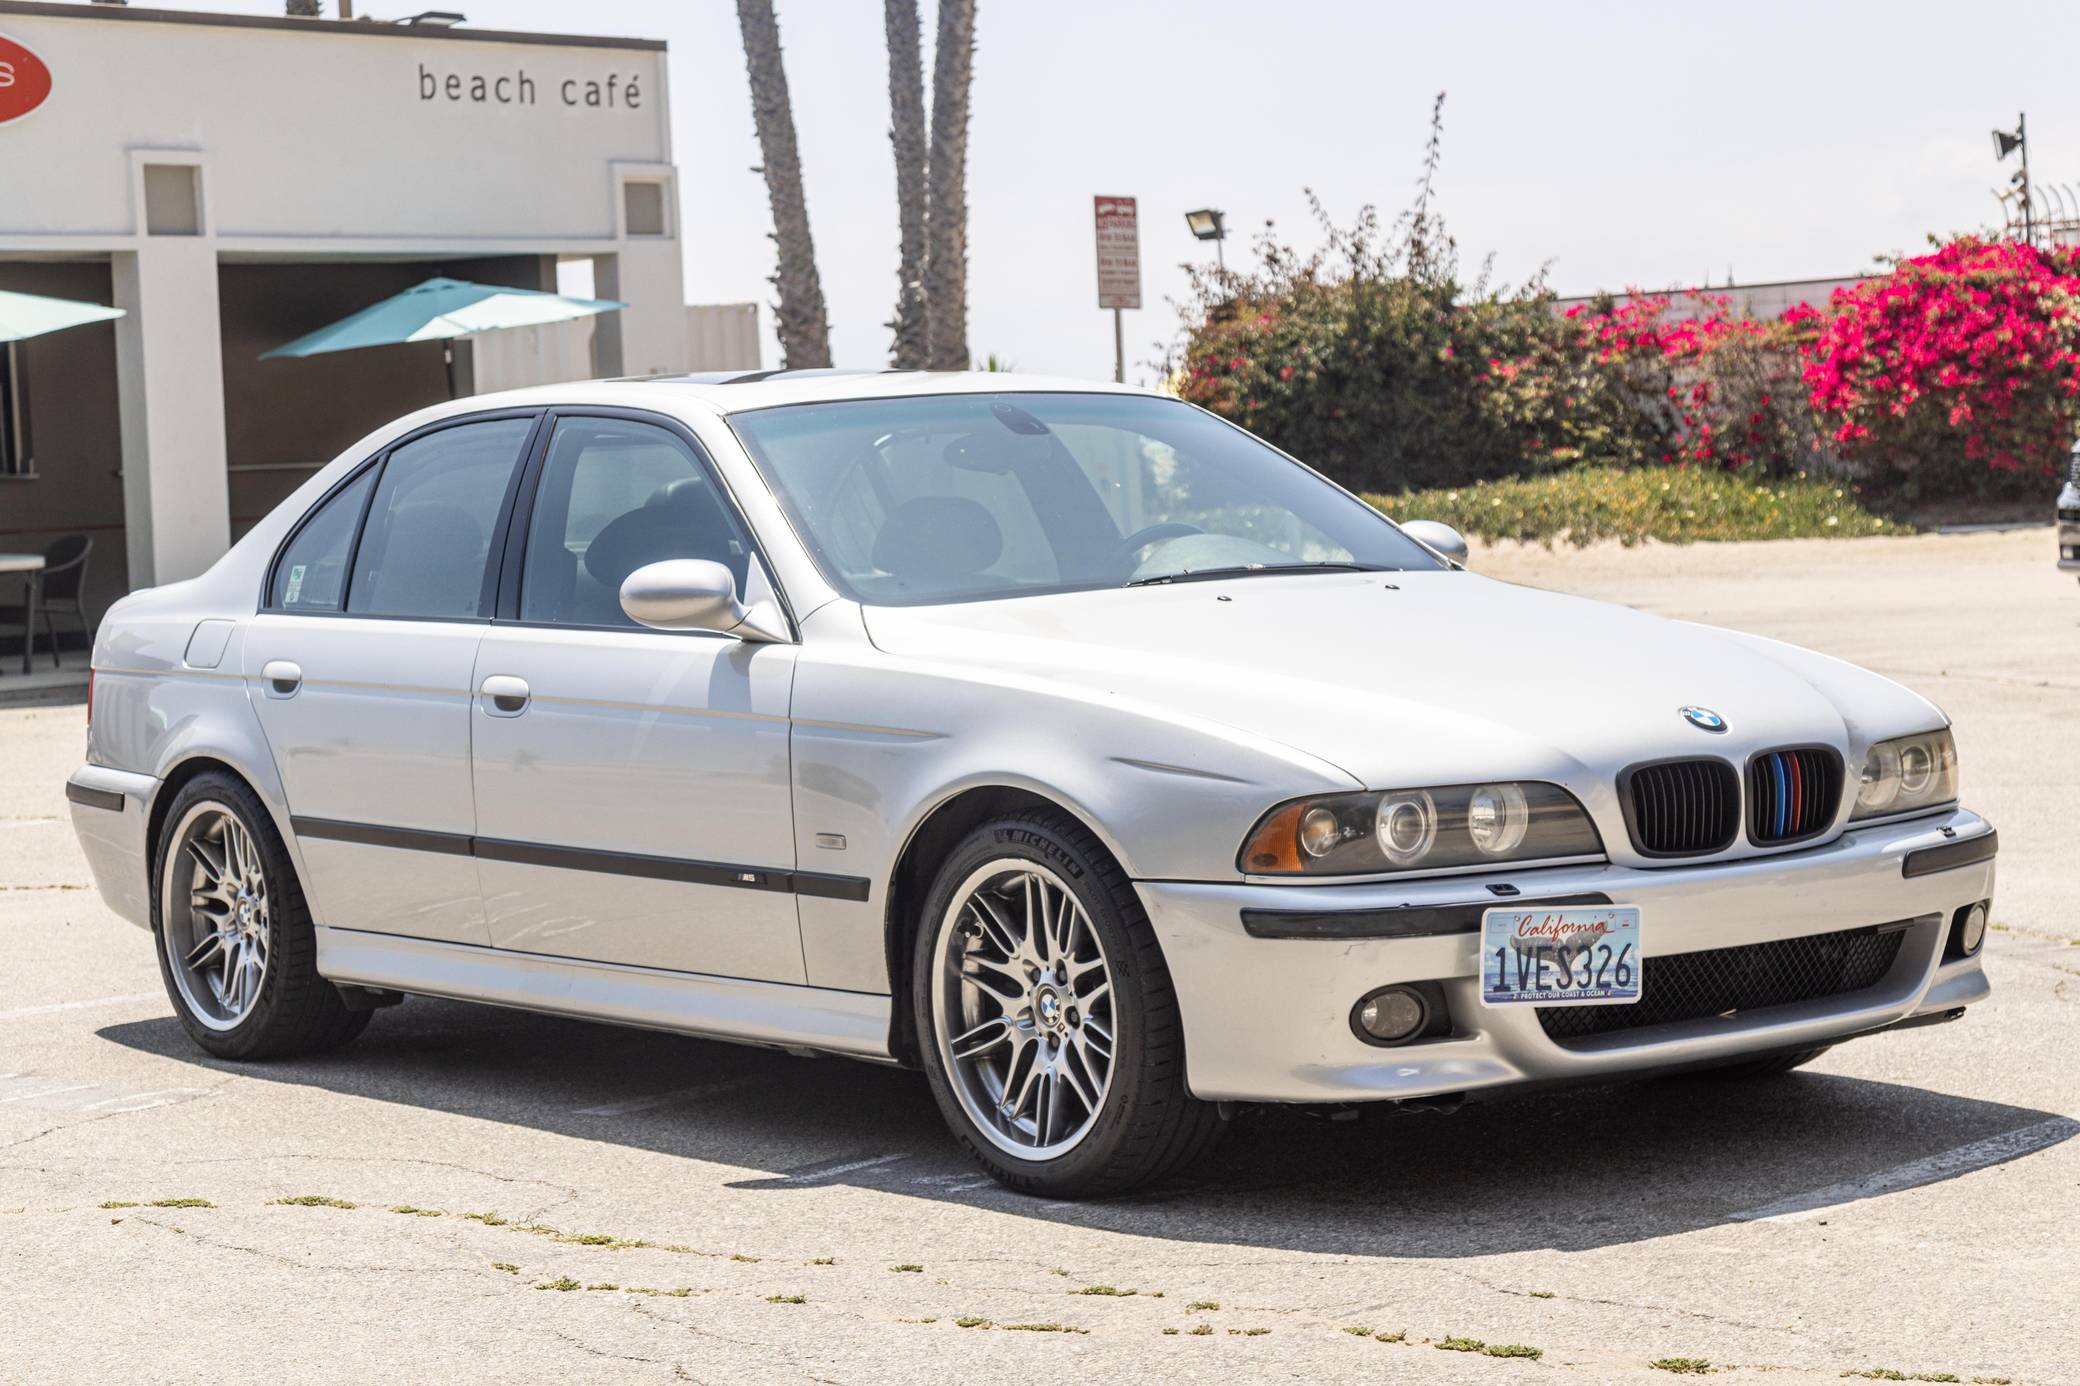 Review: A One-Owner 2002 BMW M5 